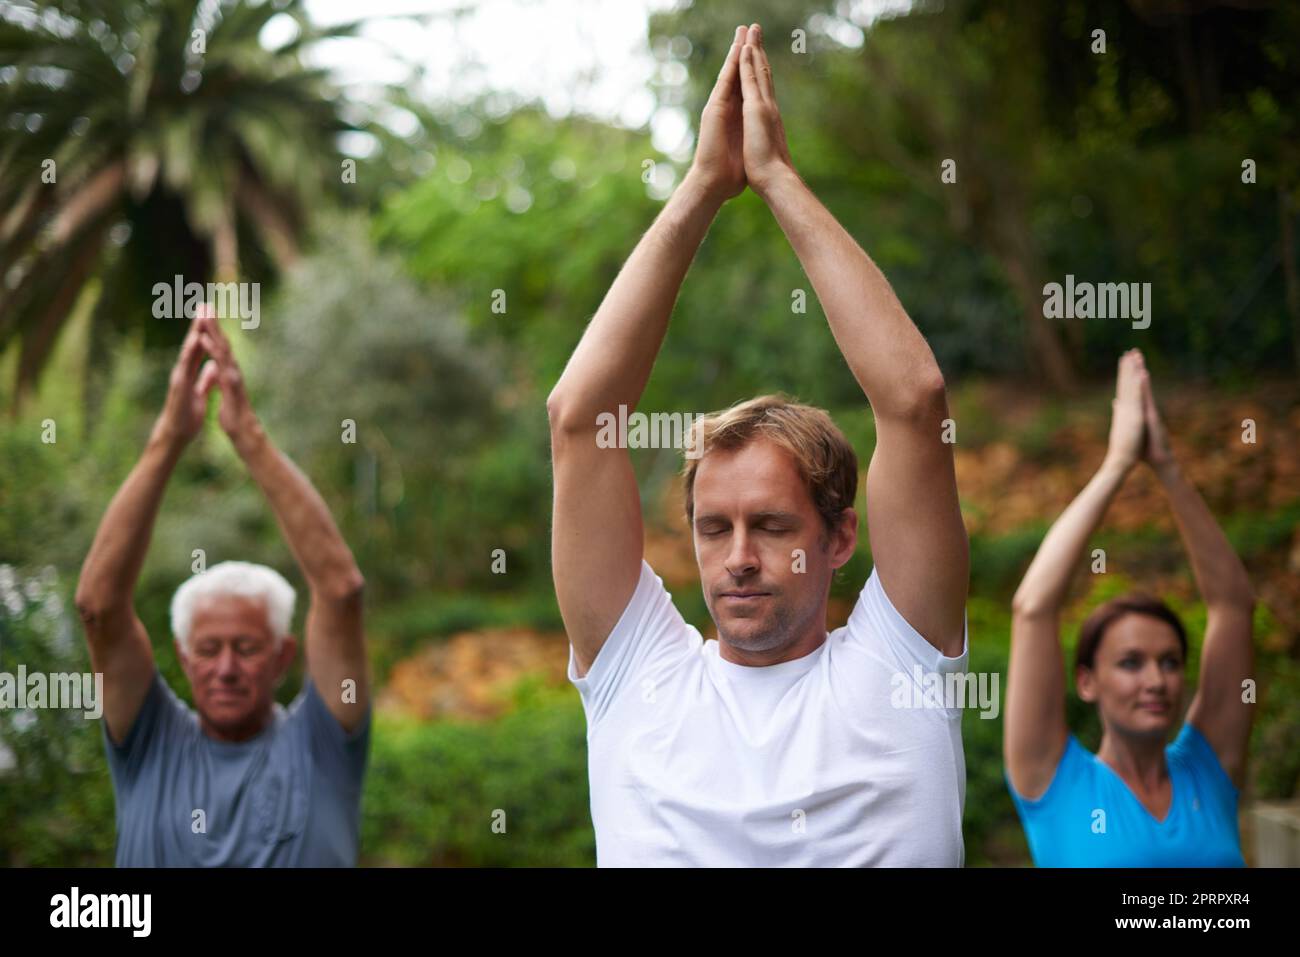 Focus and breathe. a young man leading a breathing exercise in an outdoor yoga class. Stock Photo